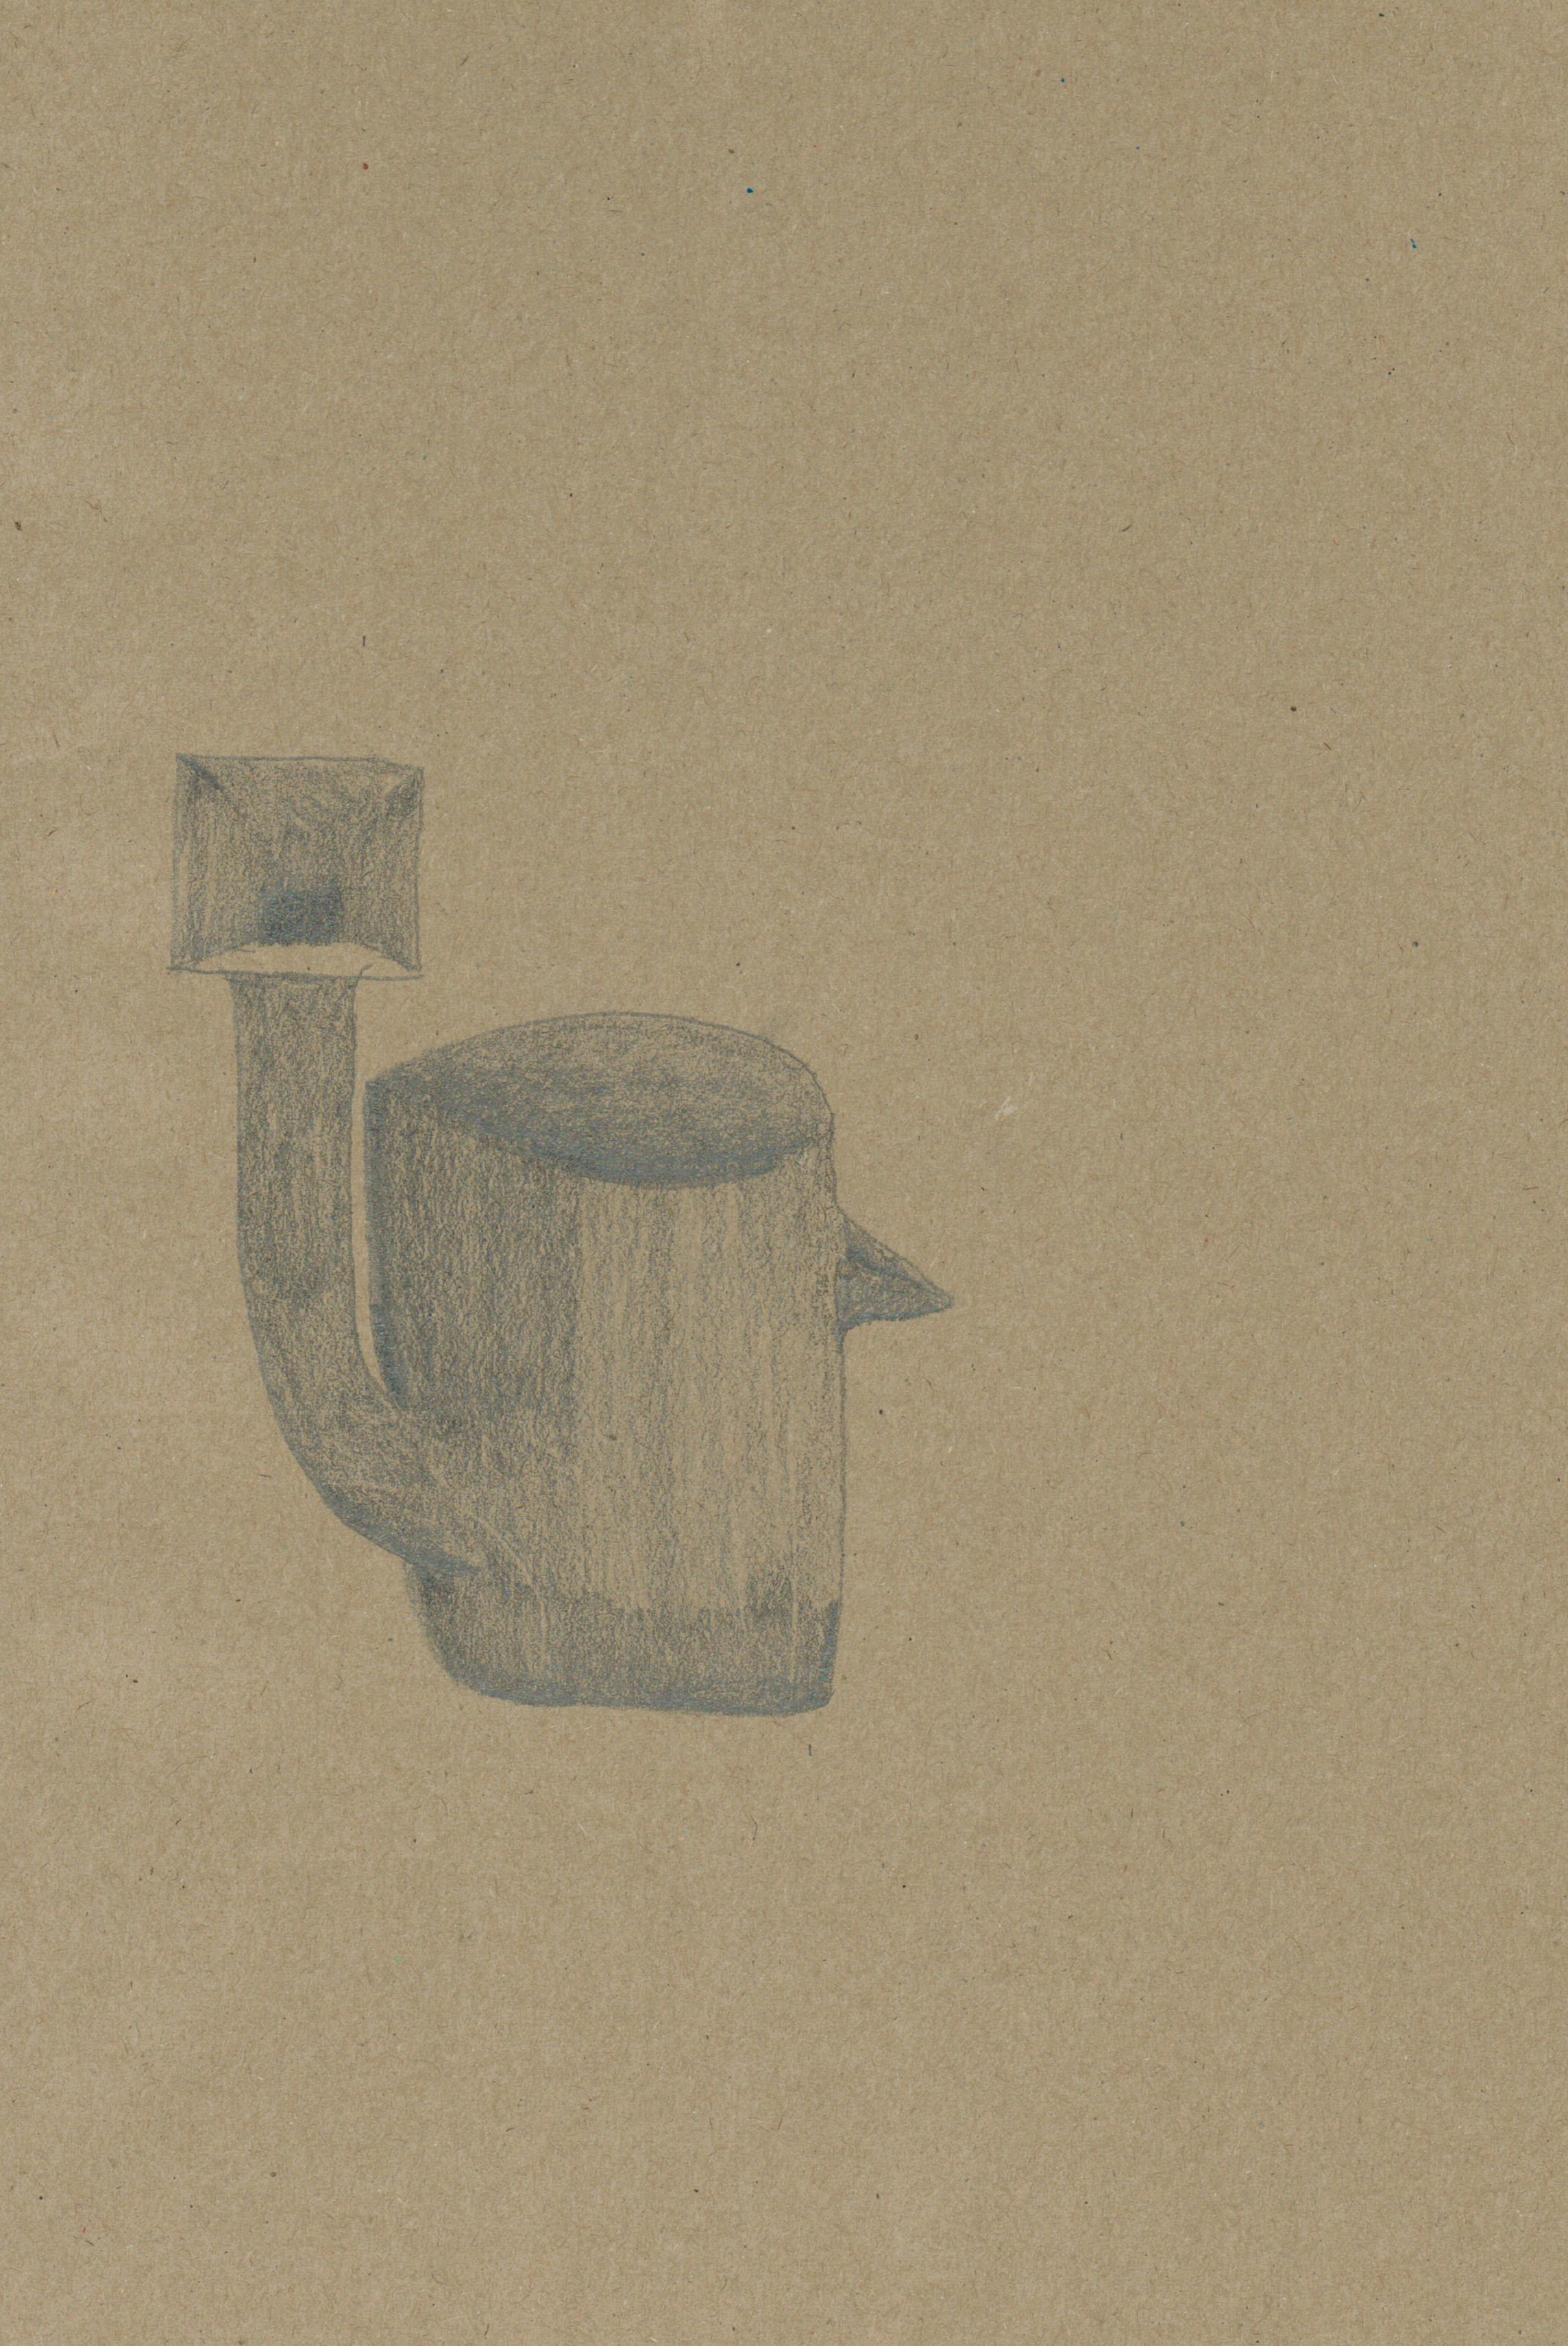 pencil drawing of a small pitcher with an extension tube coming out